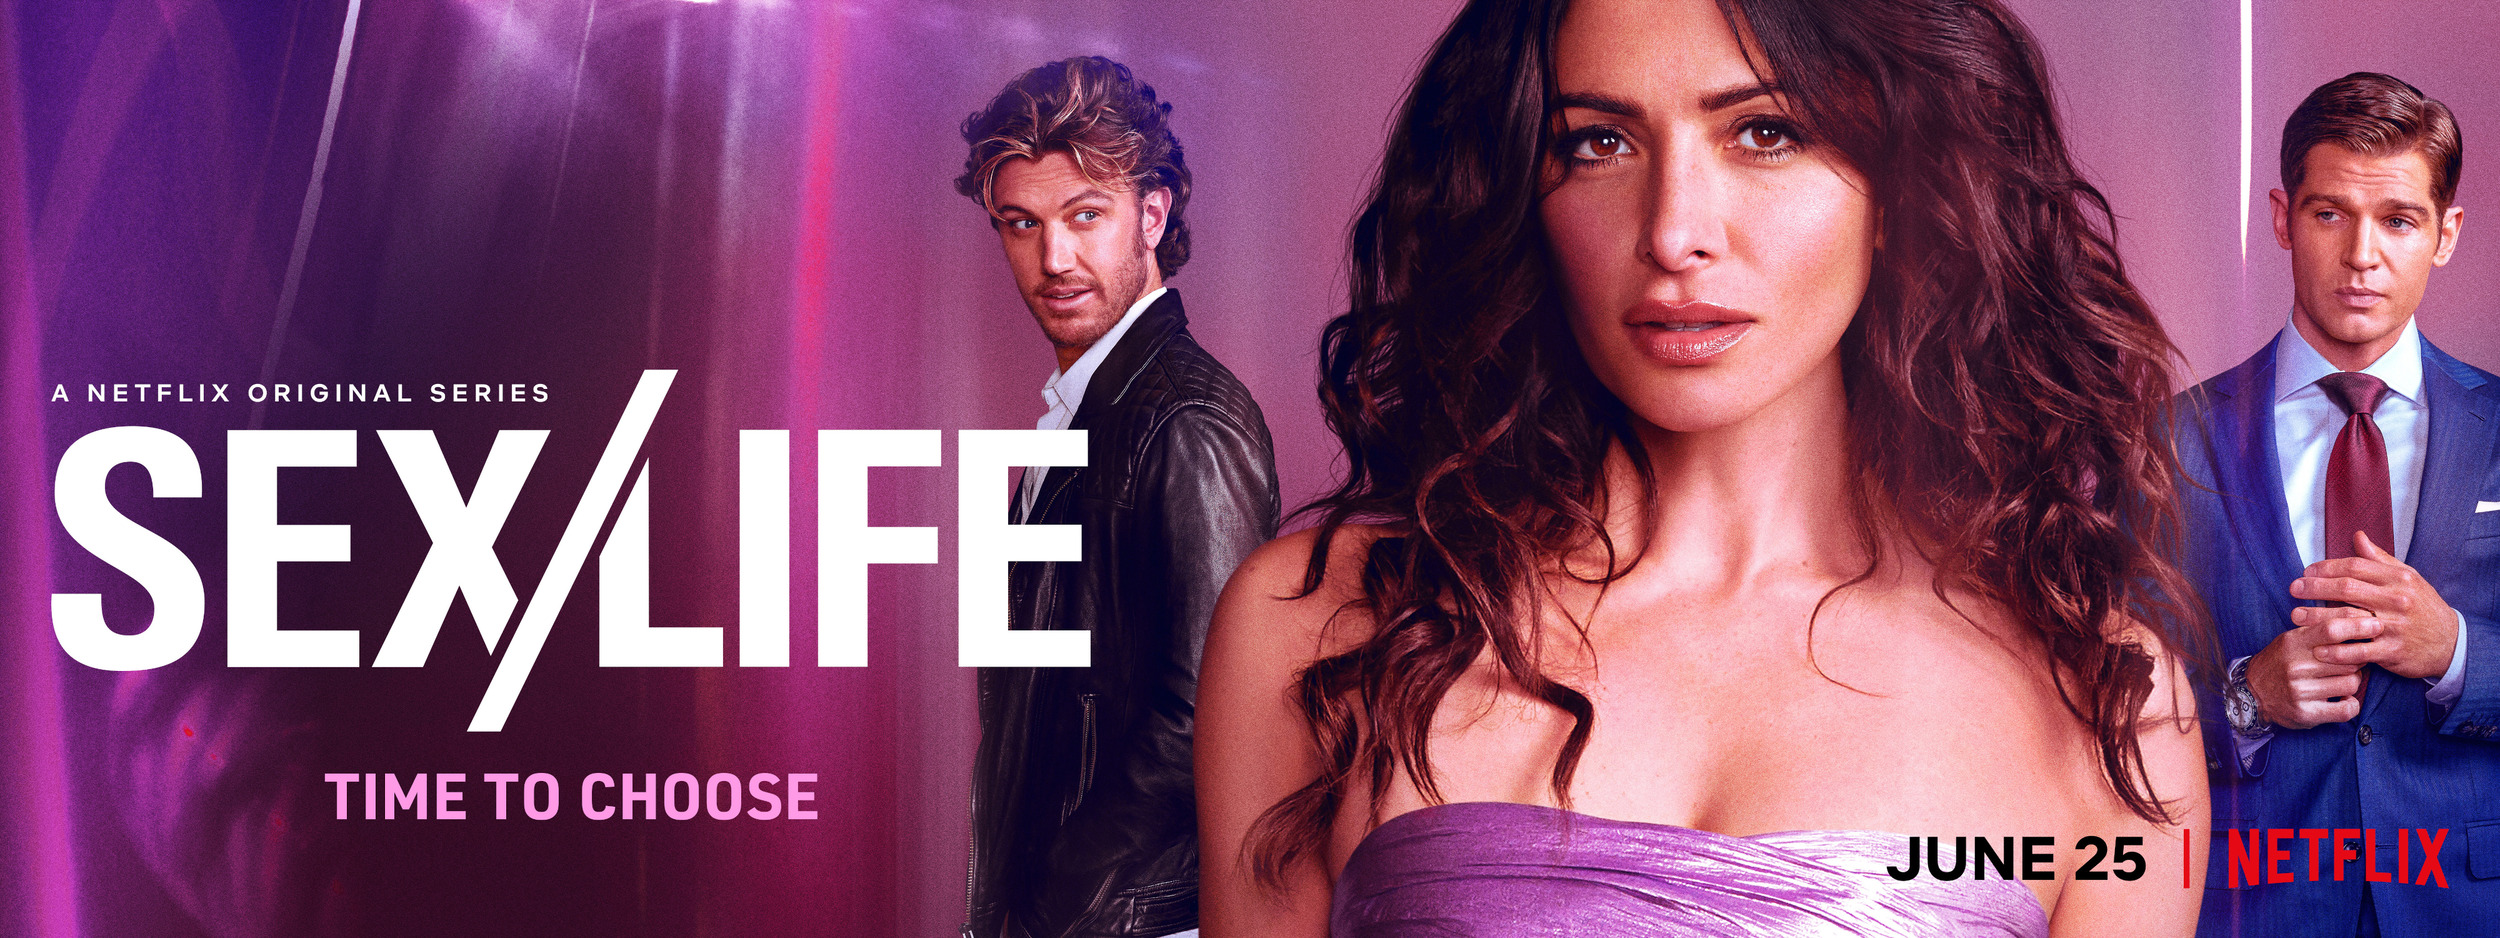 Mega Sized TV Poster Image for Sex/Life (#3 of 3)